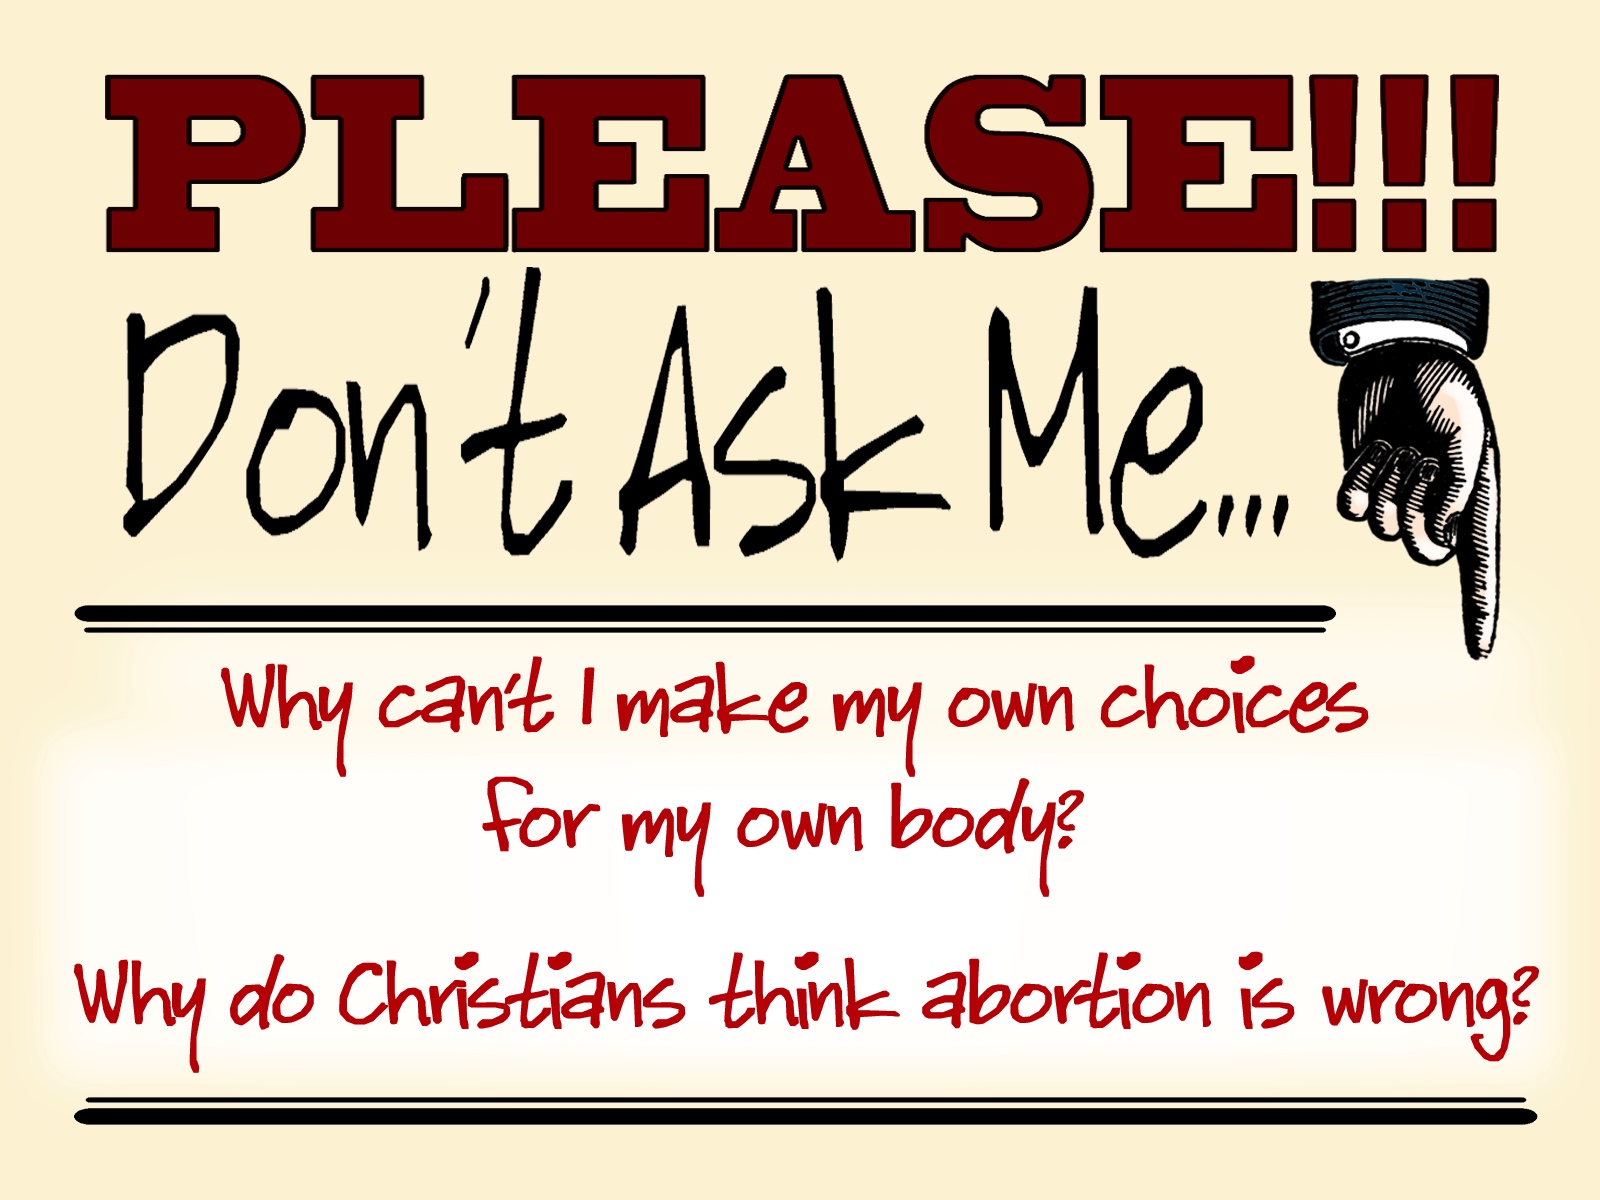 Please don’t ask me.. Why I can’t make my own choices for my own body? Why do Christians think abortion is wrong?